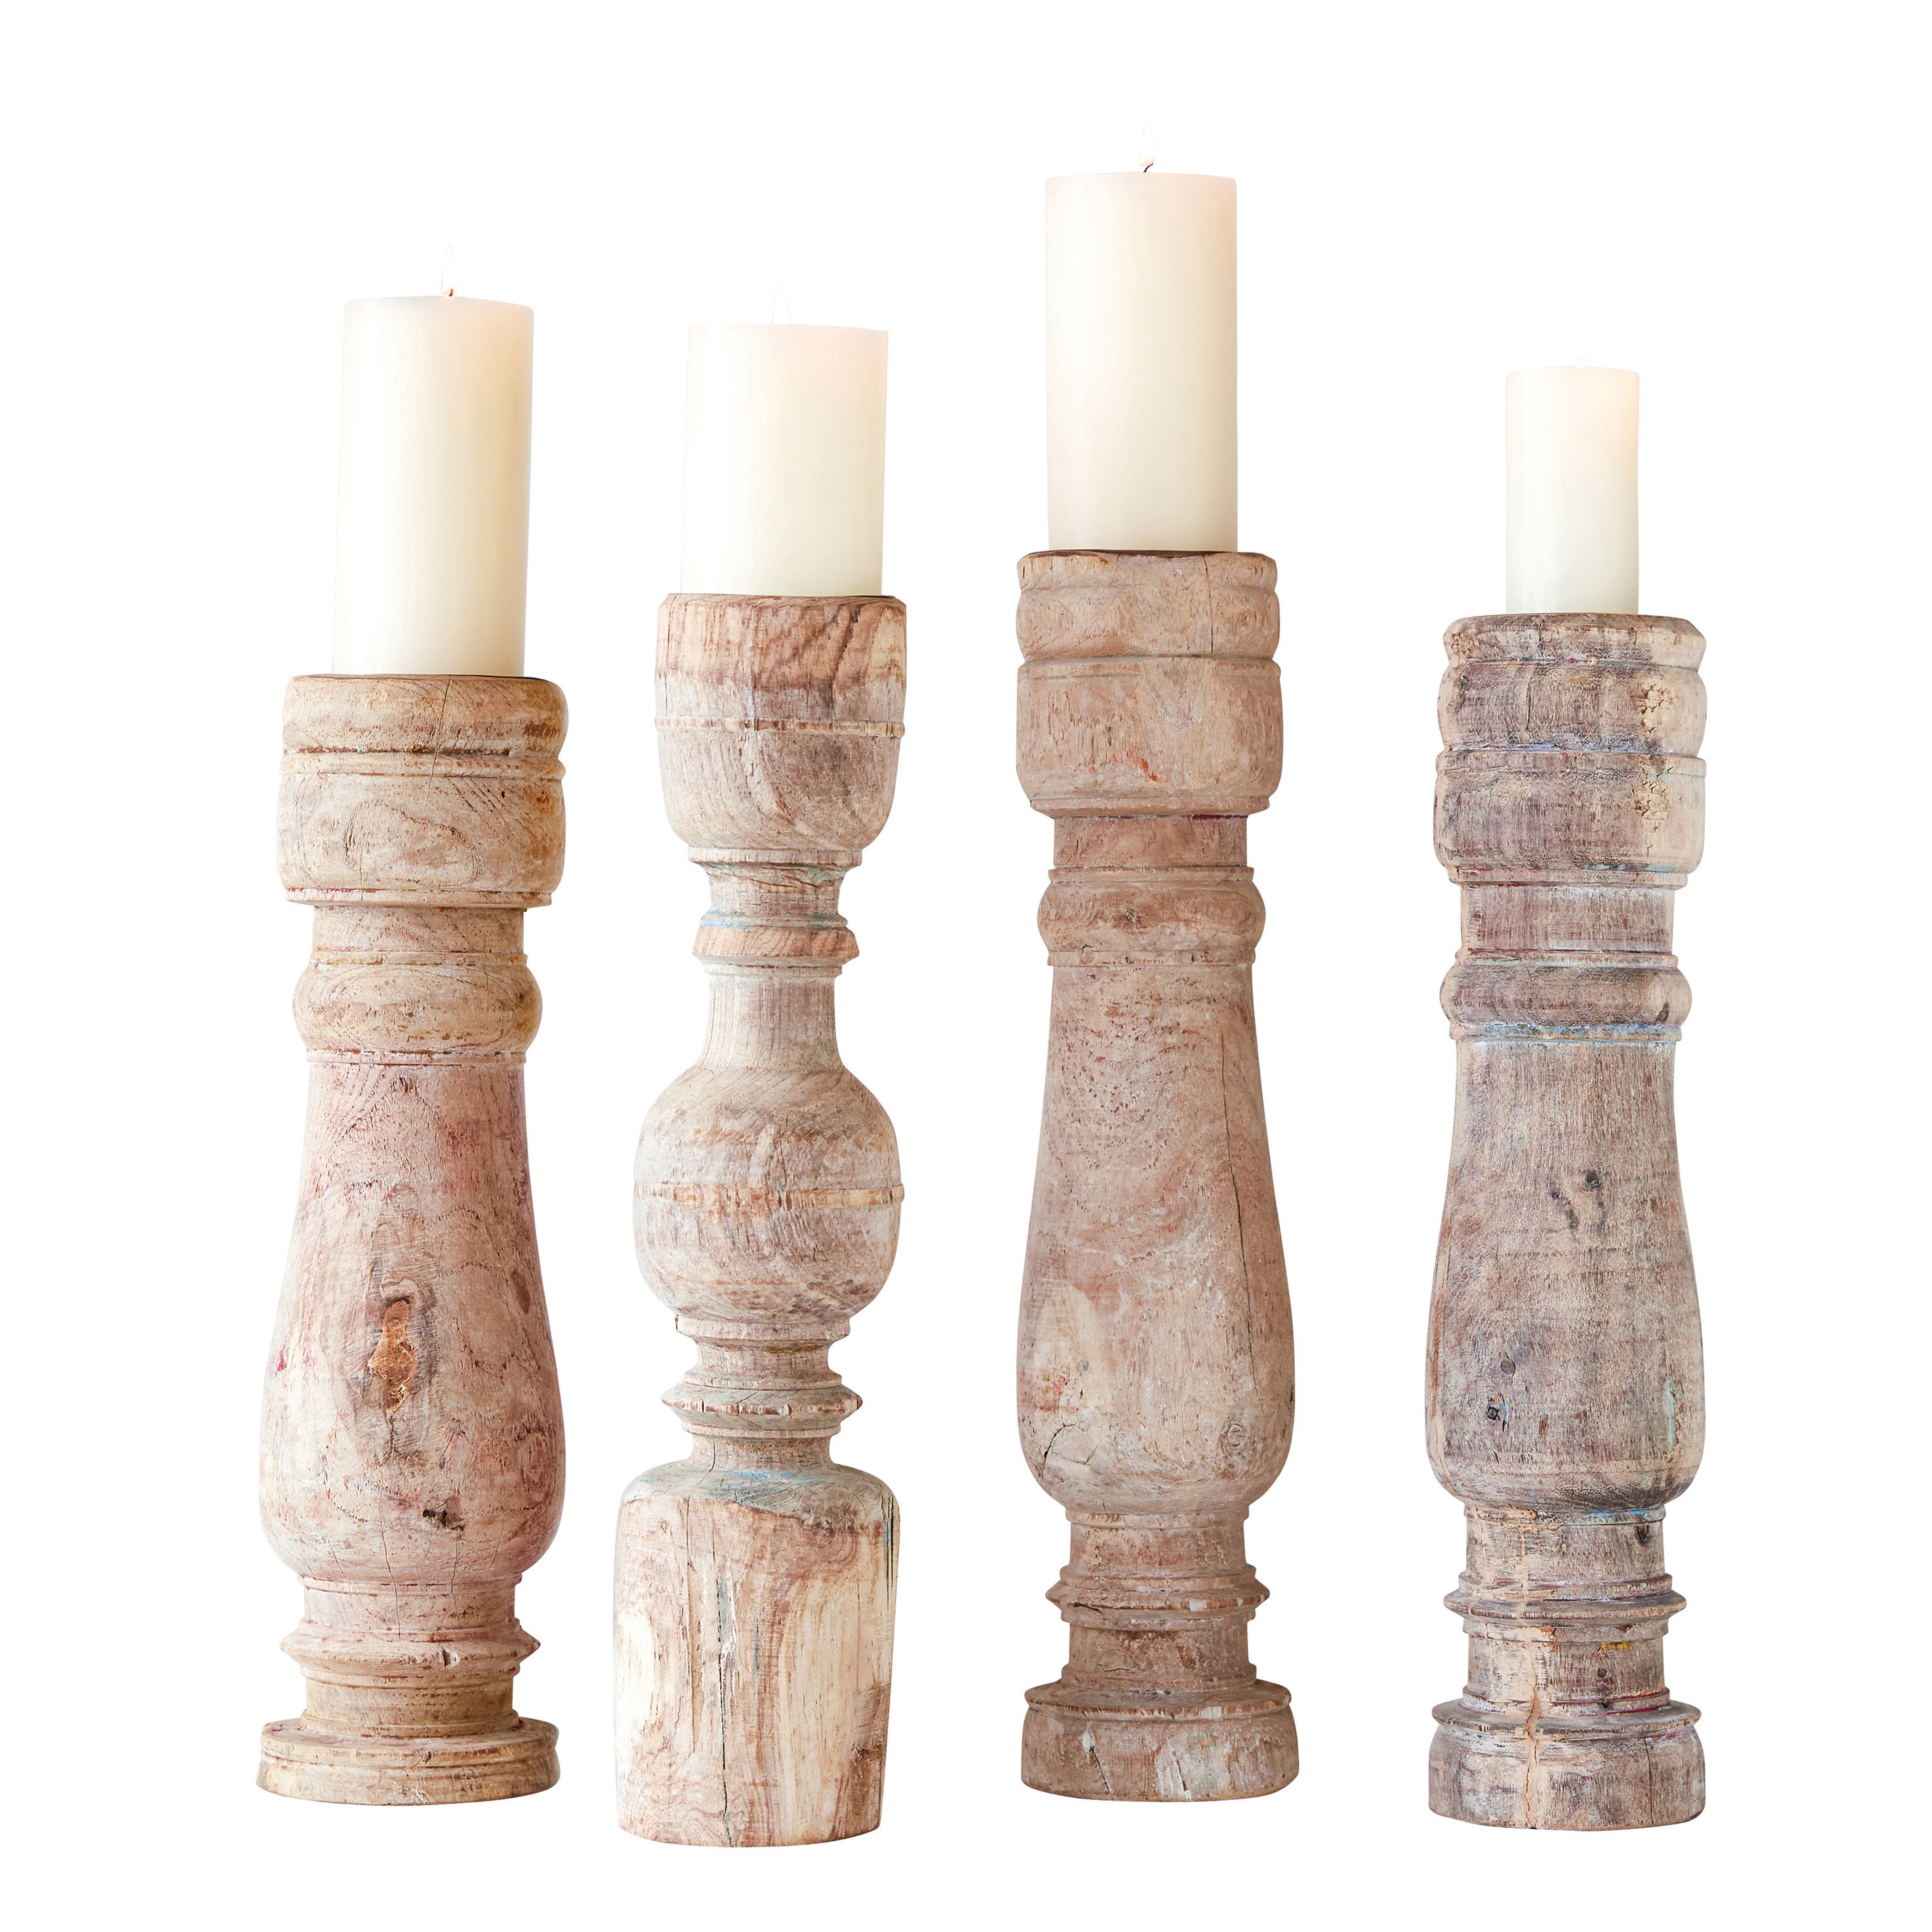 Found Hand Carved Wood Table Leg Pillar Candleholder - Nomad Home